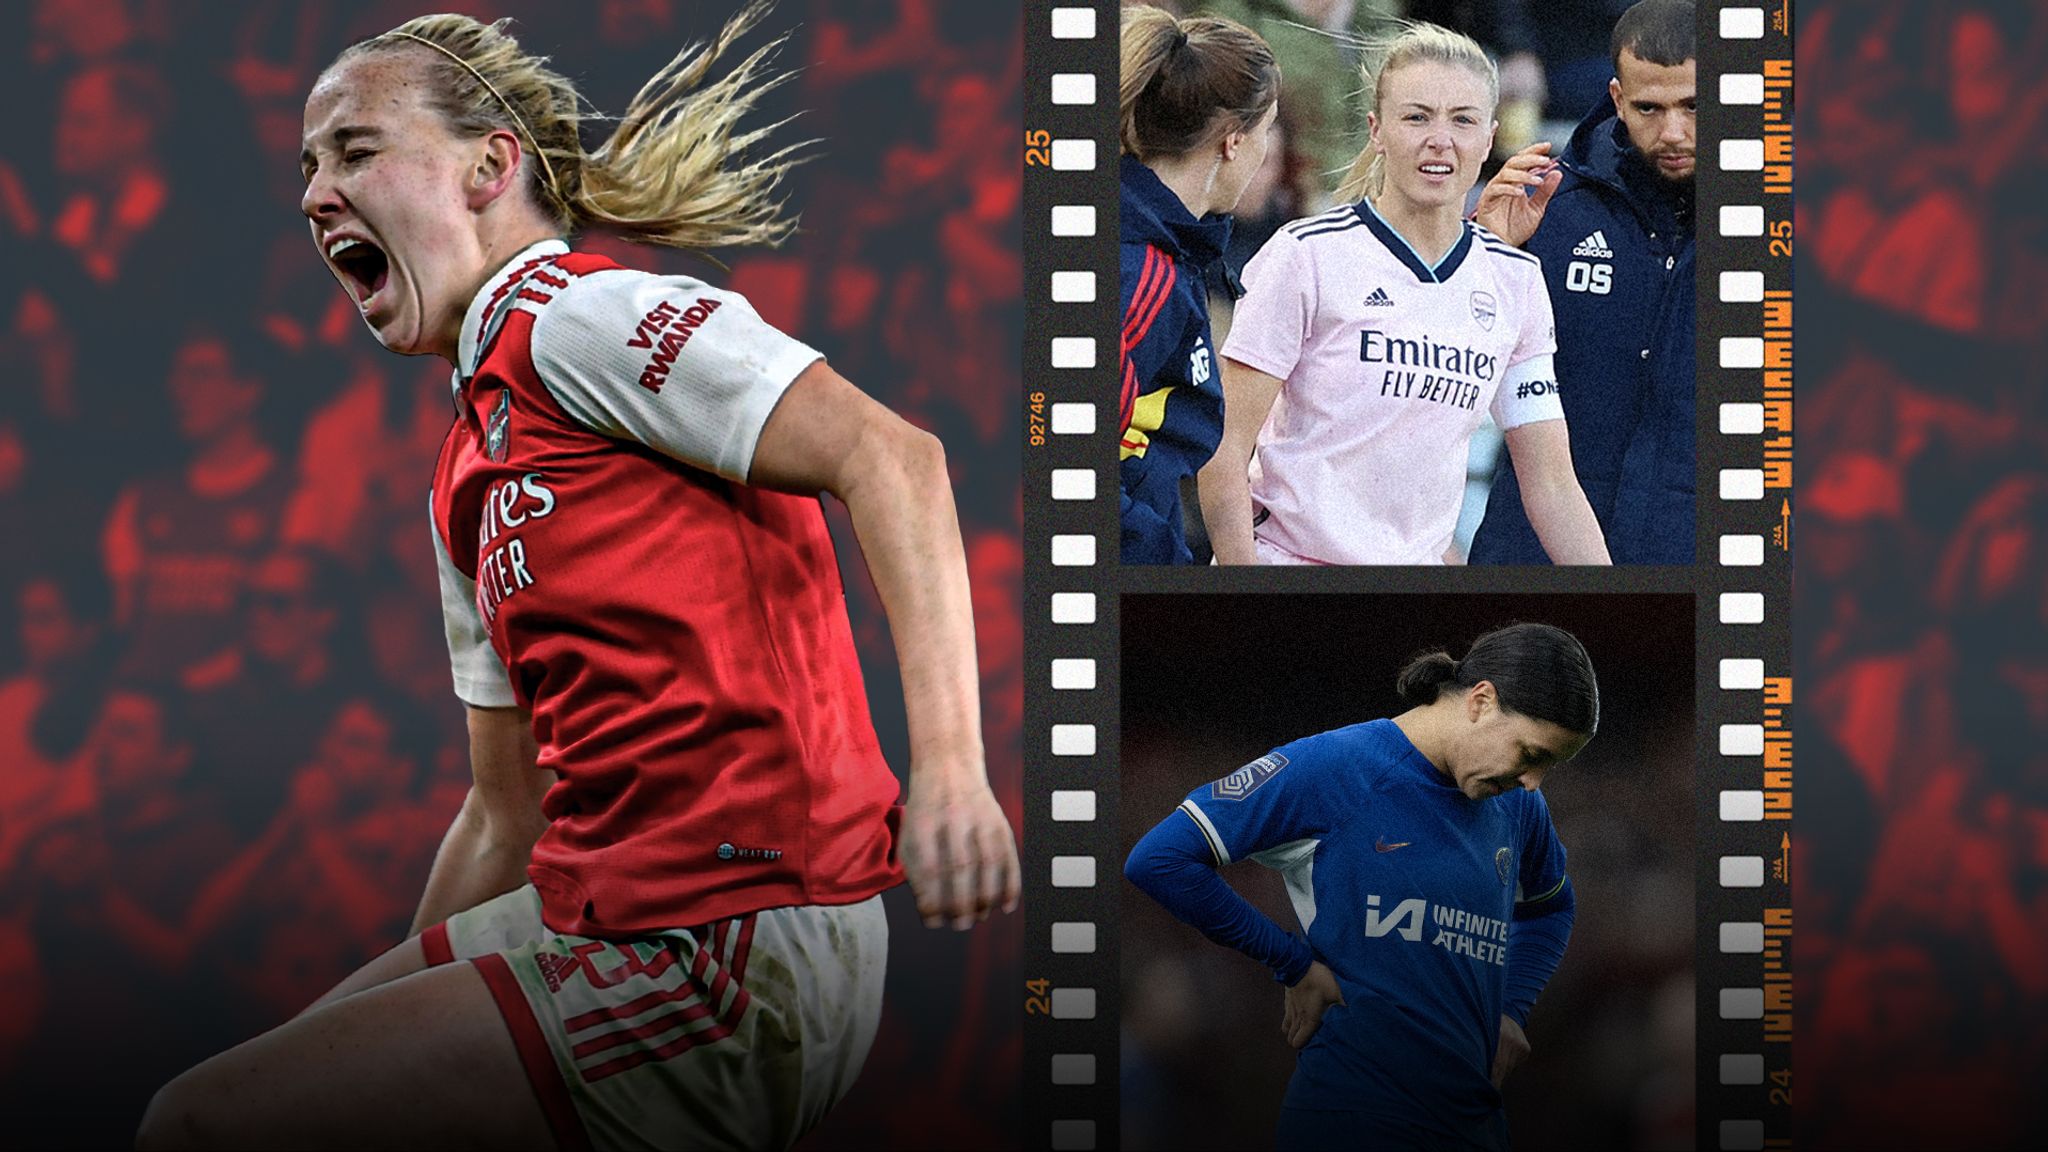 Future of Football: Why ACL injuries have been on rise in women's